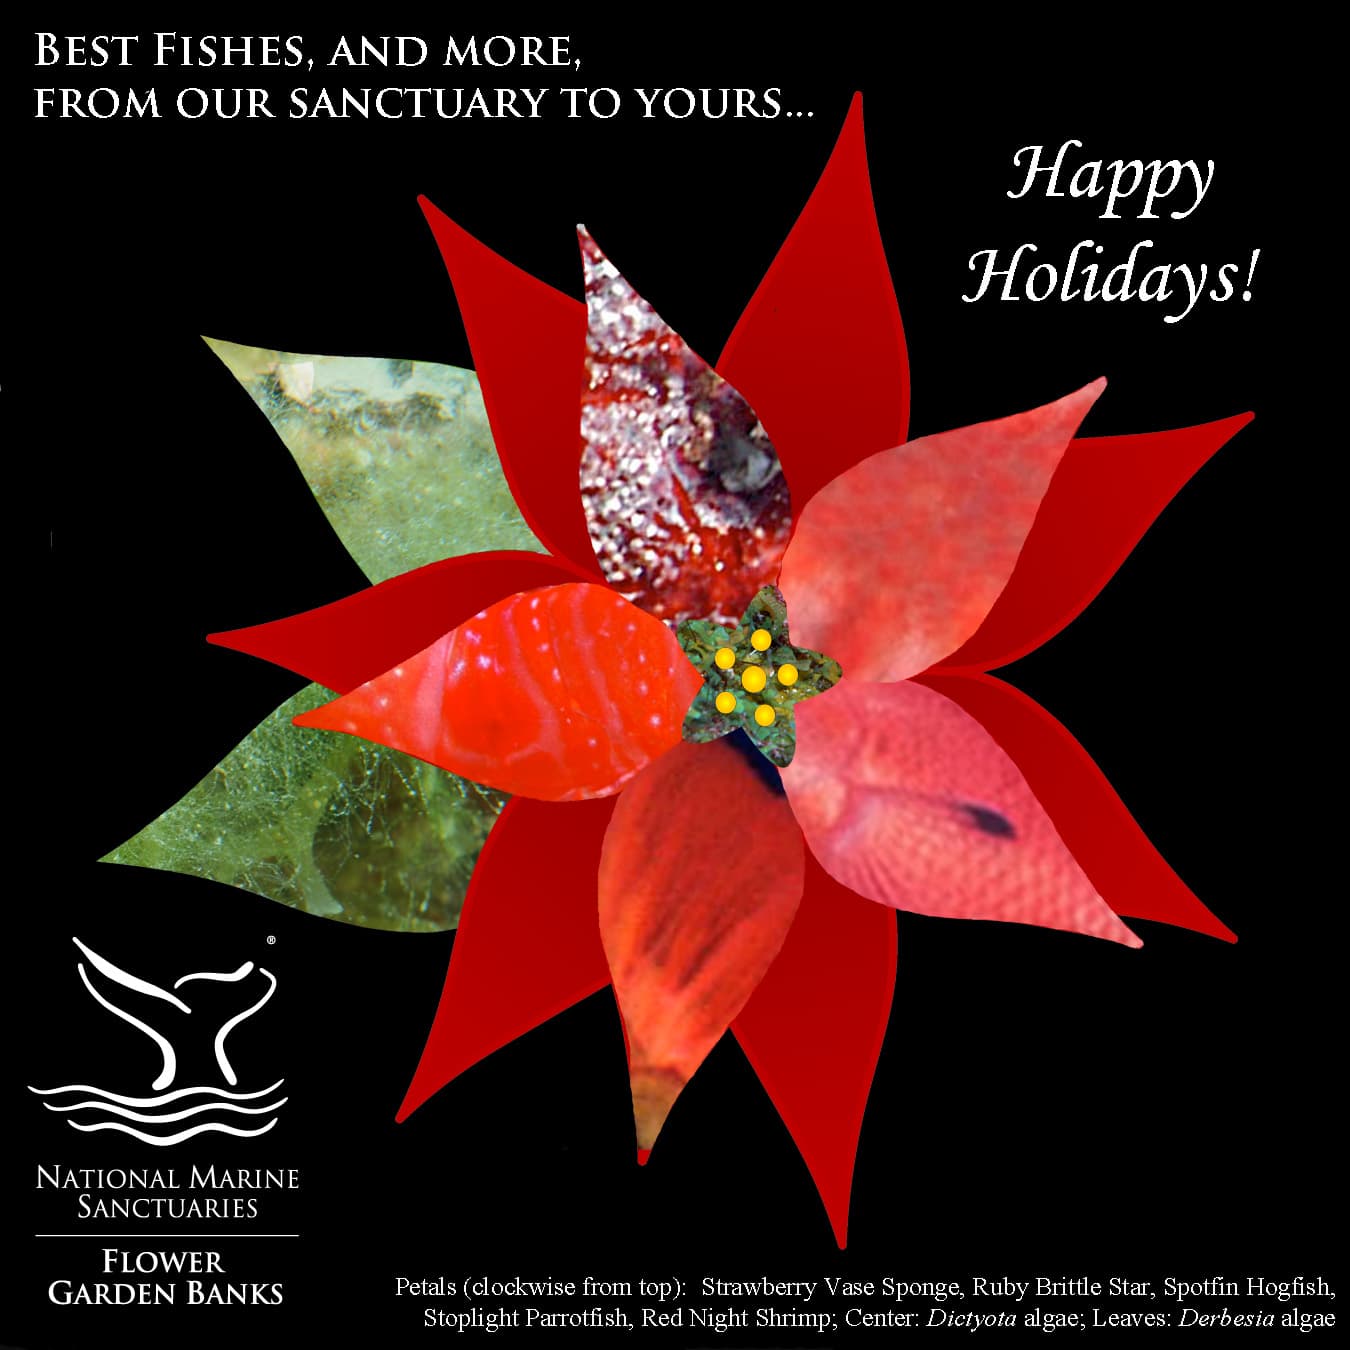 Poinsettia picture with petals and leaves made from animal and plant images.